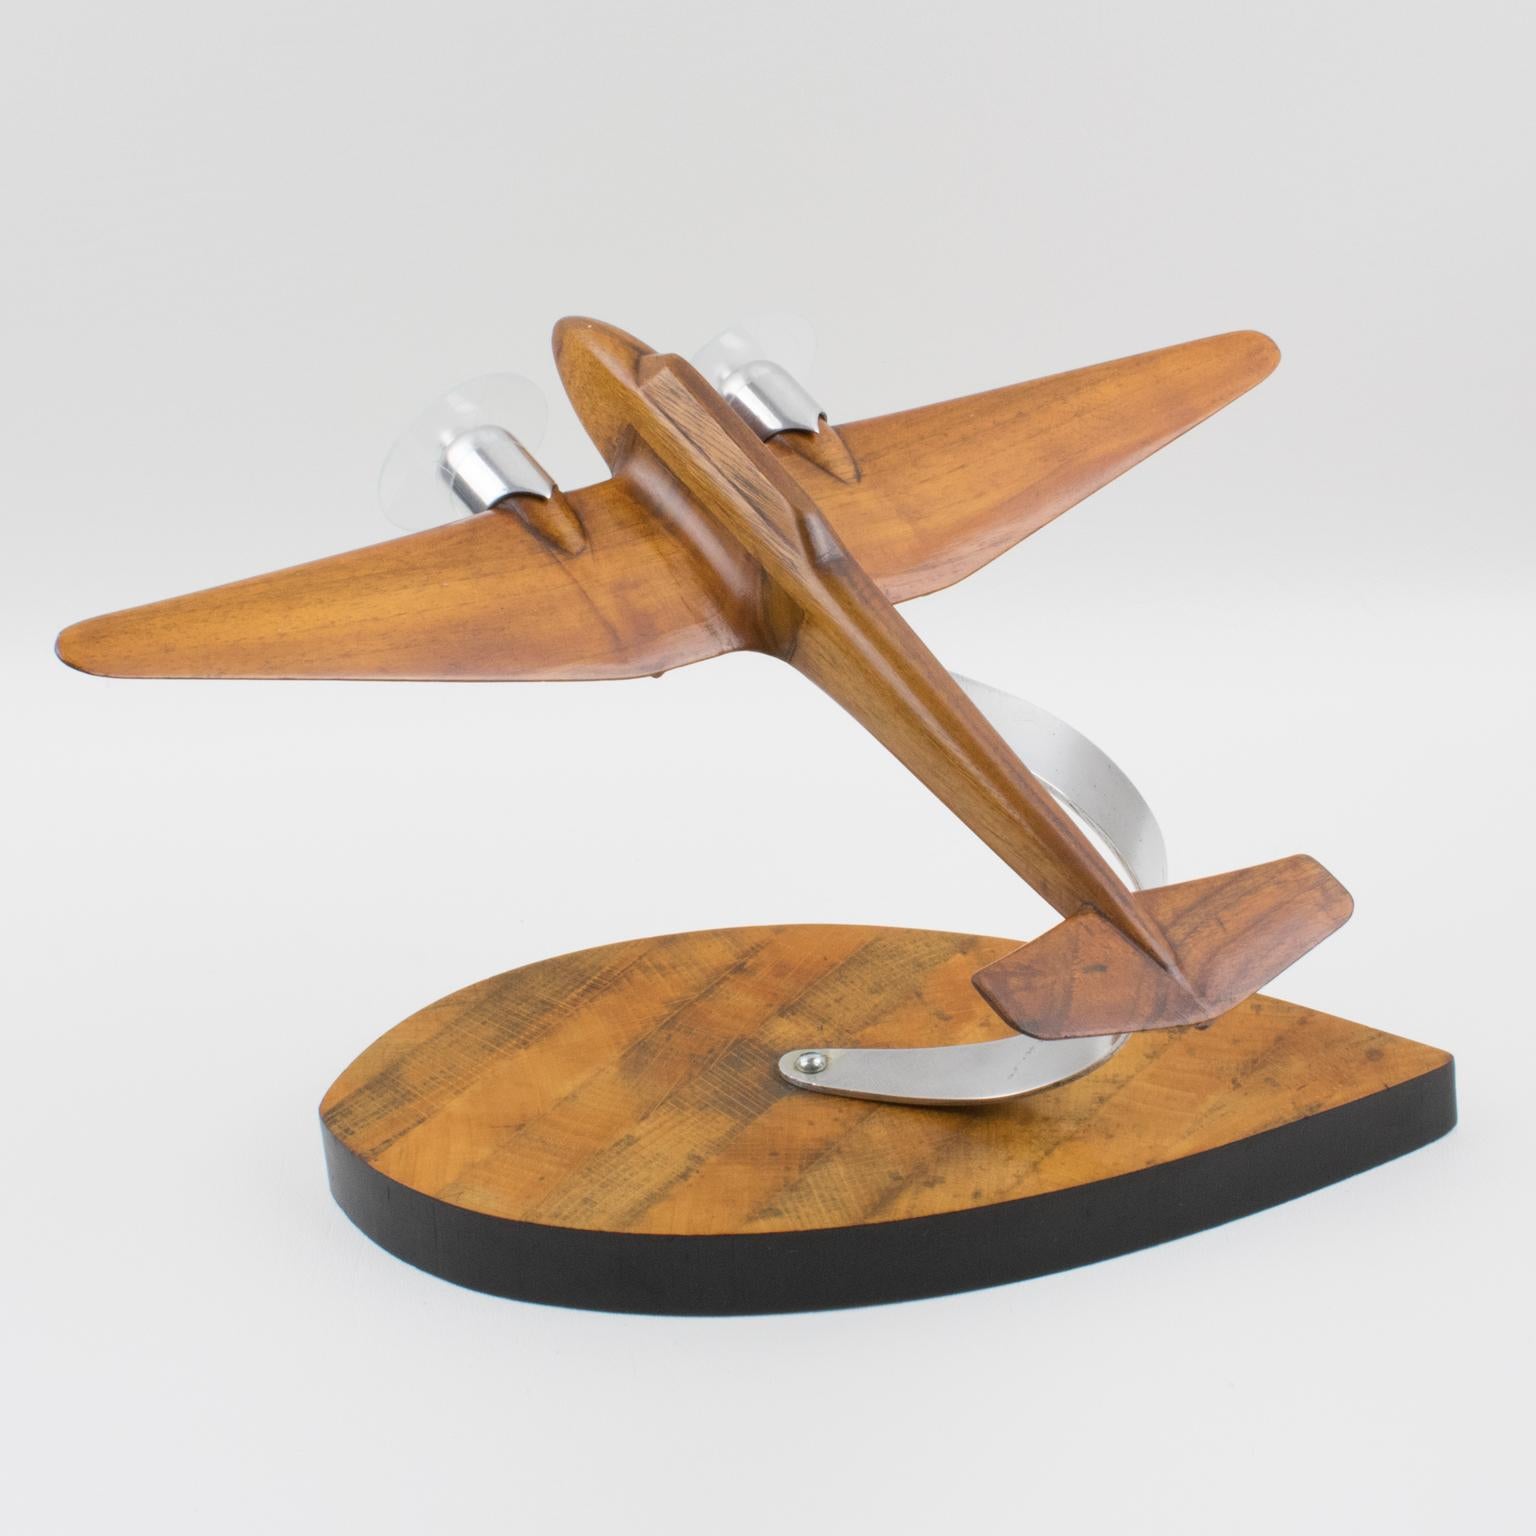 French Art Deco, 1940s Wooden and Aluminum Airplane Aviation Model 6